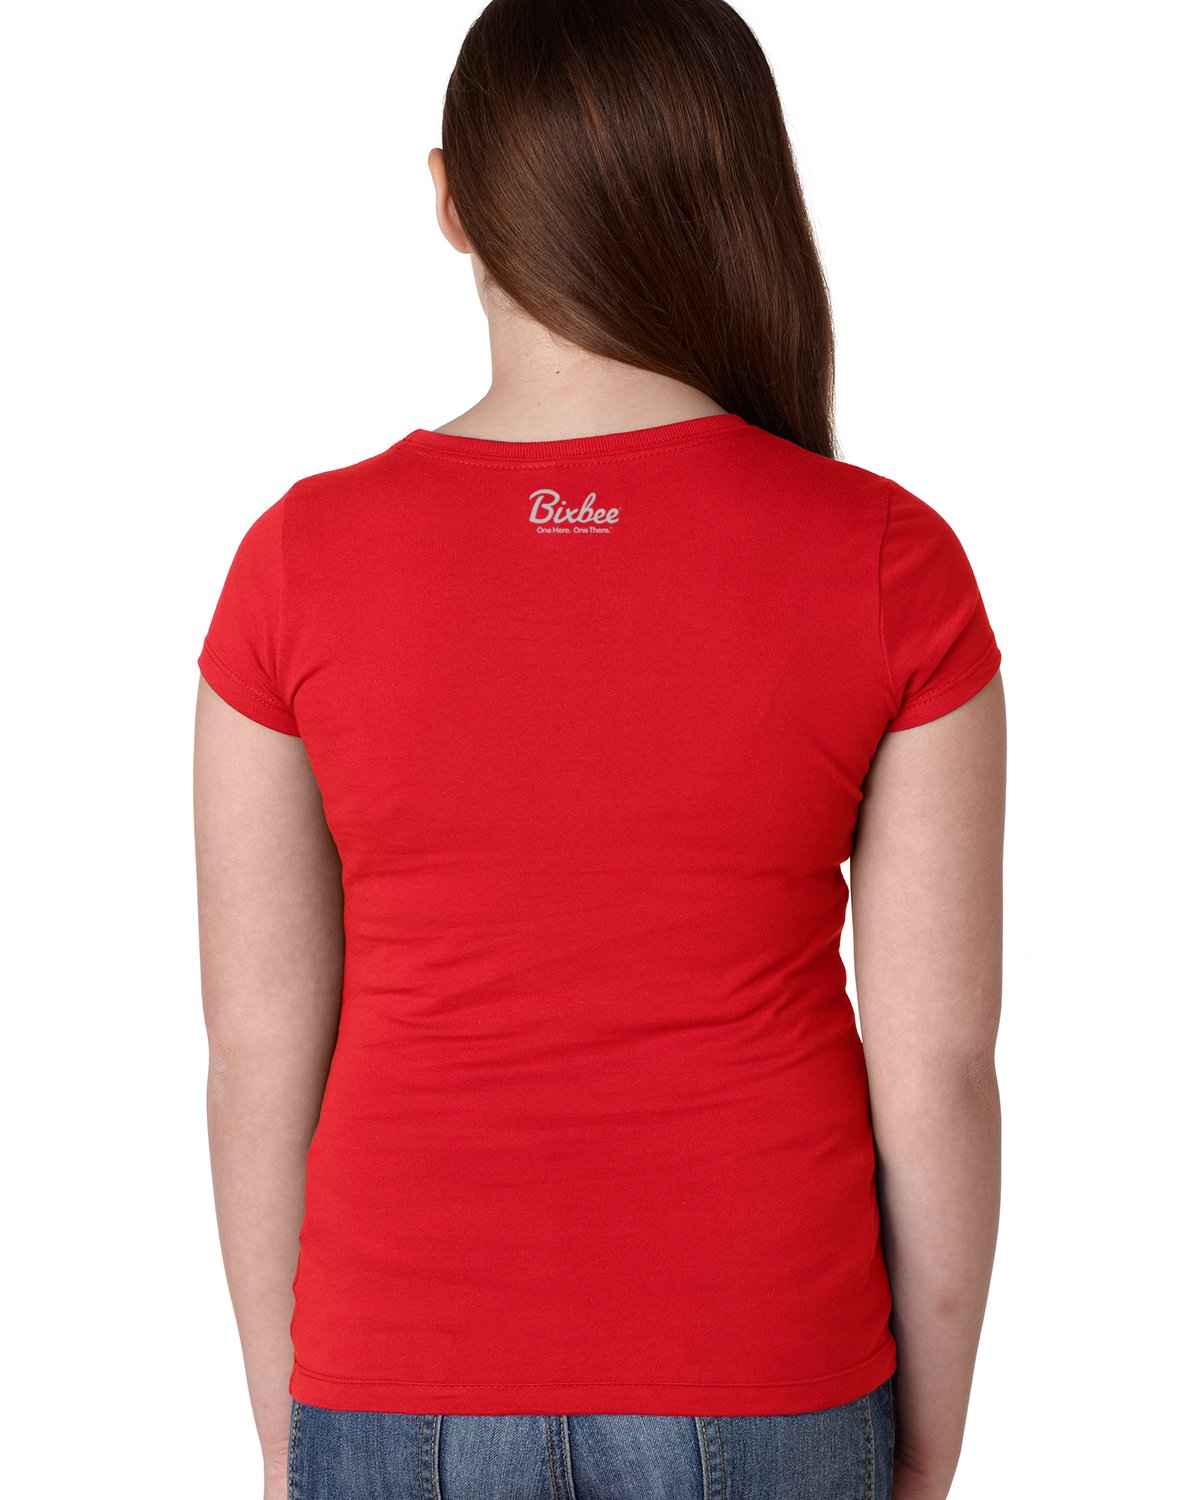 Inside-Out T-Shirt - Ready-to-Wear 1A5W6F